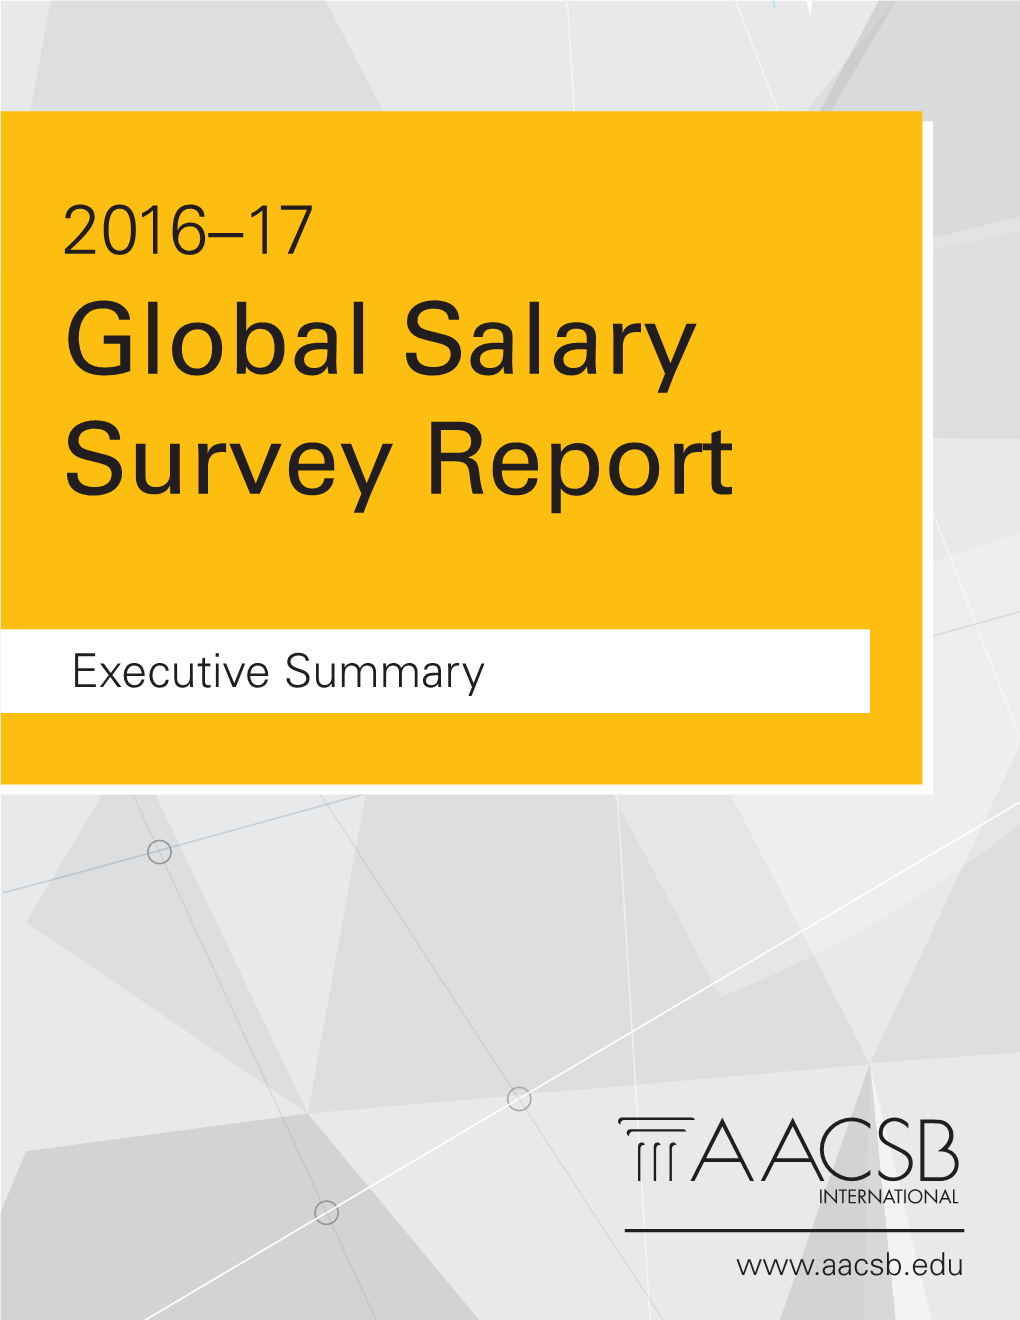 AACSB: 2016-17 Global Salary Survey Report